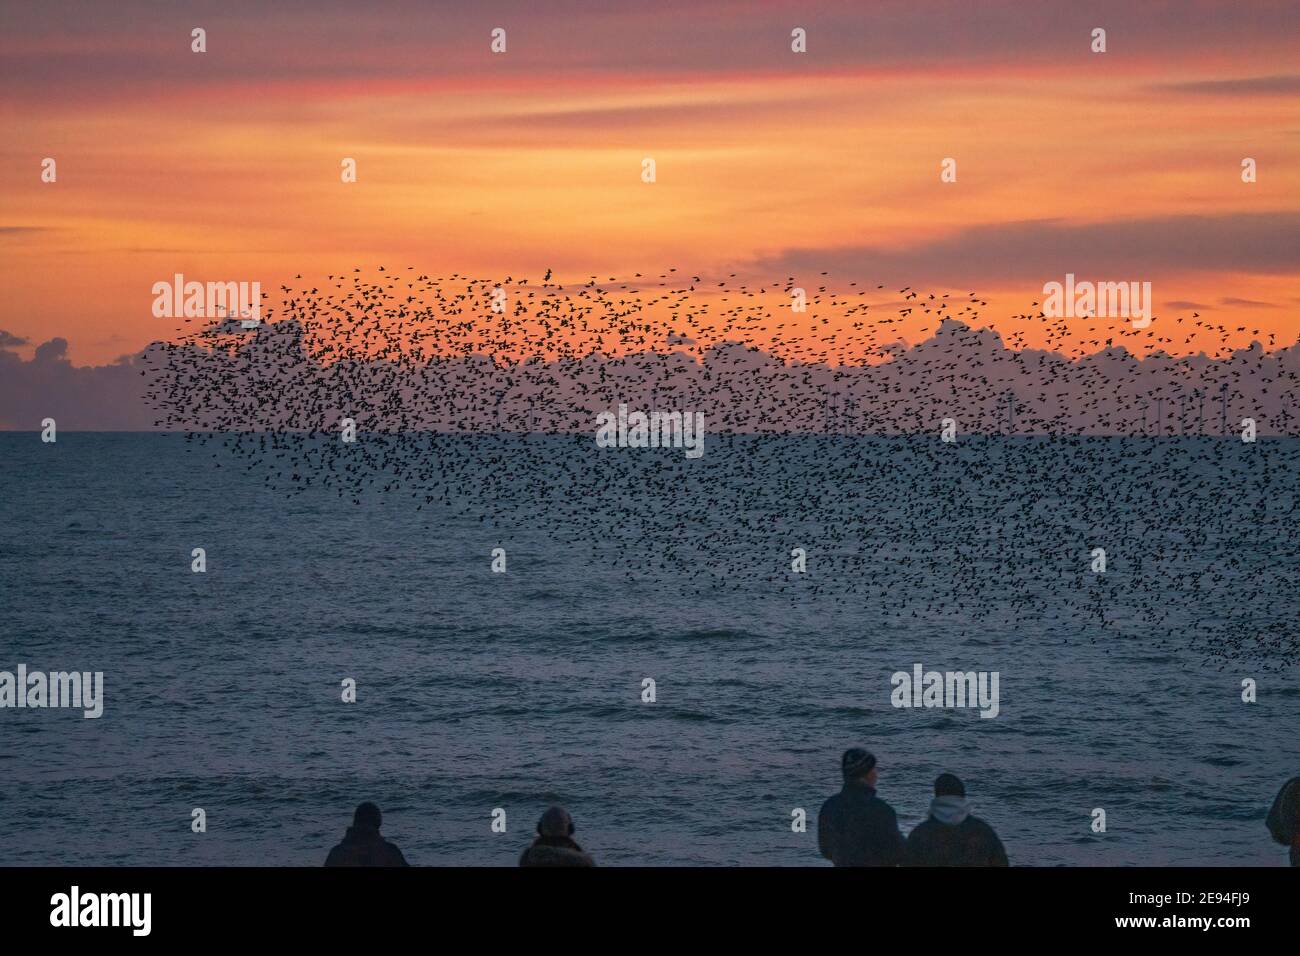 People watch a Murmuration of the Starlings-Sturnus vulgaris at the Palace Pier, Brighton, East Sussex, England, Stock Photo